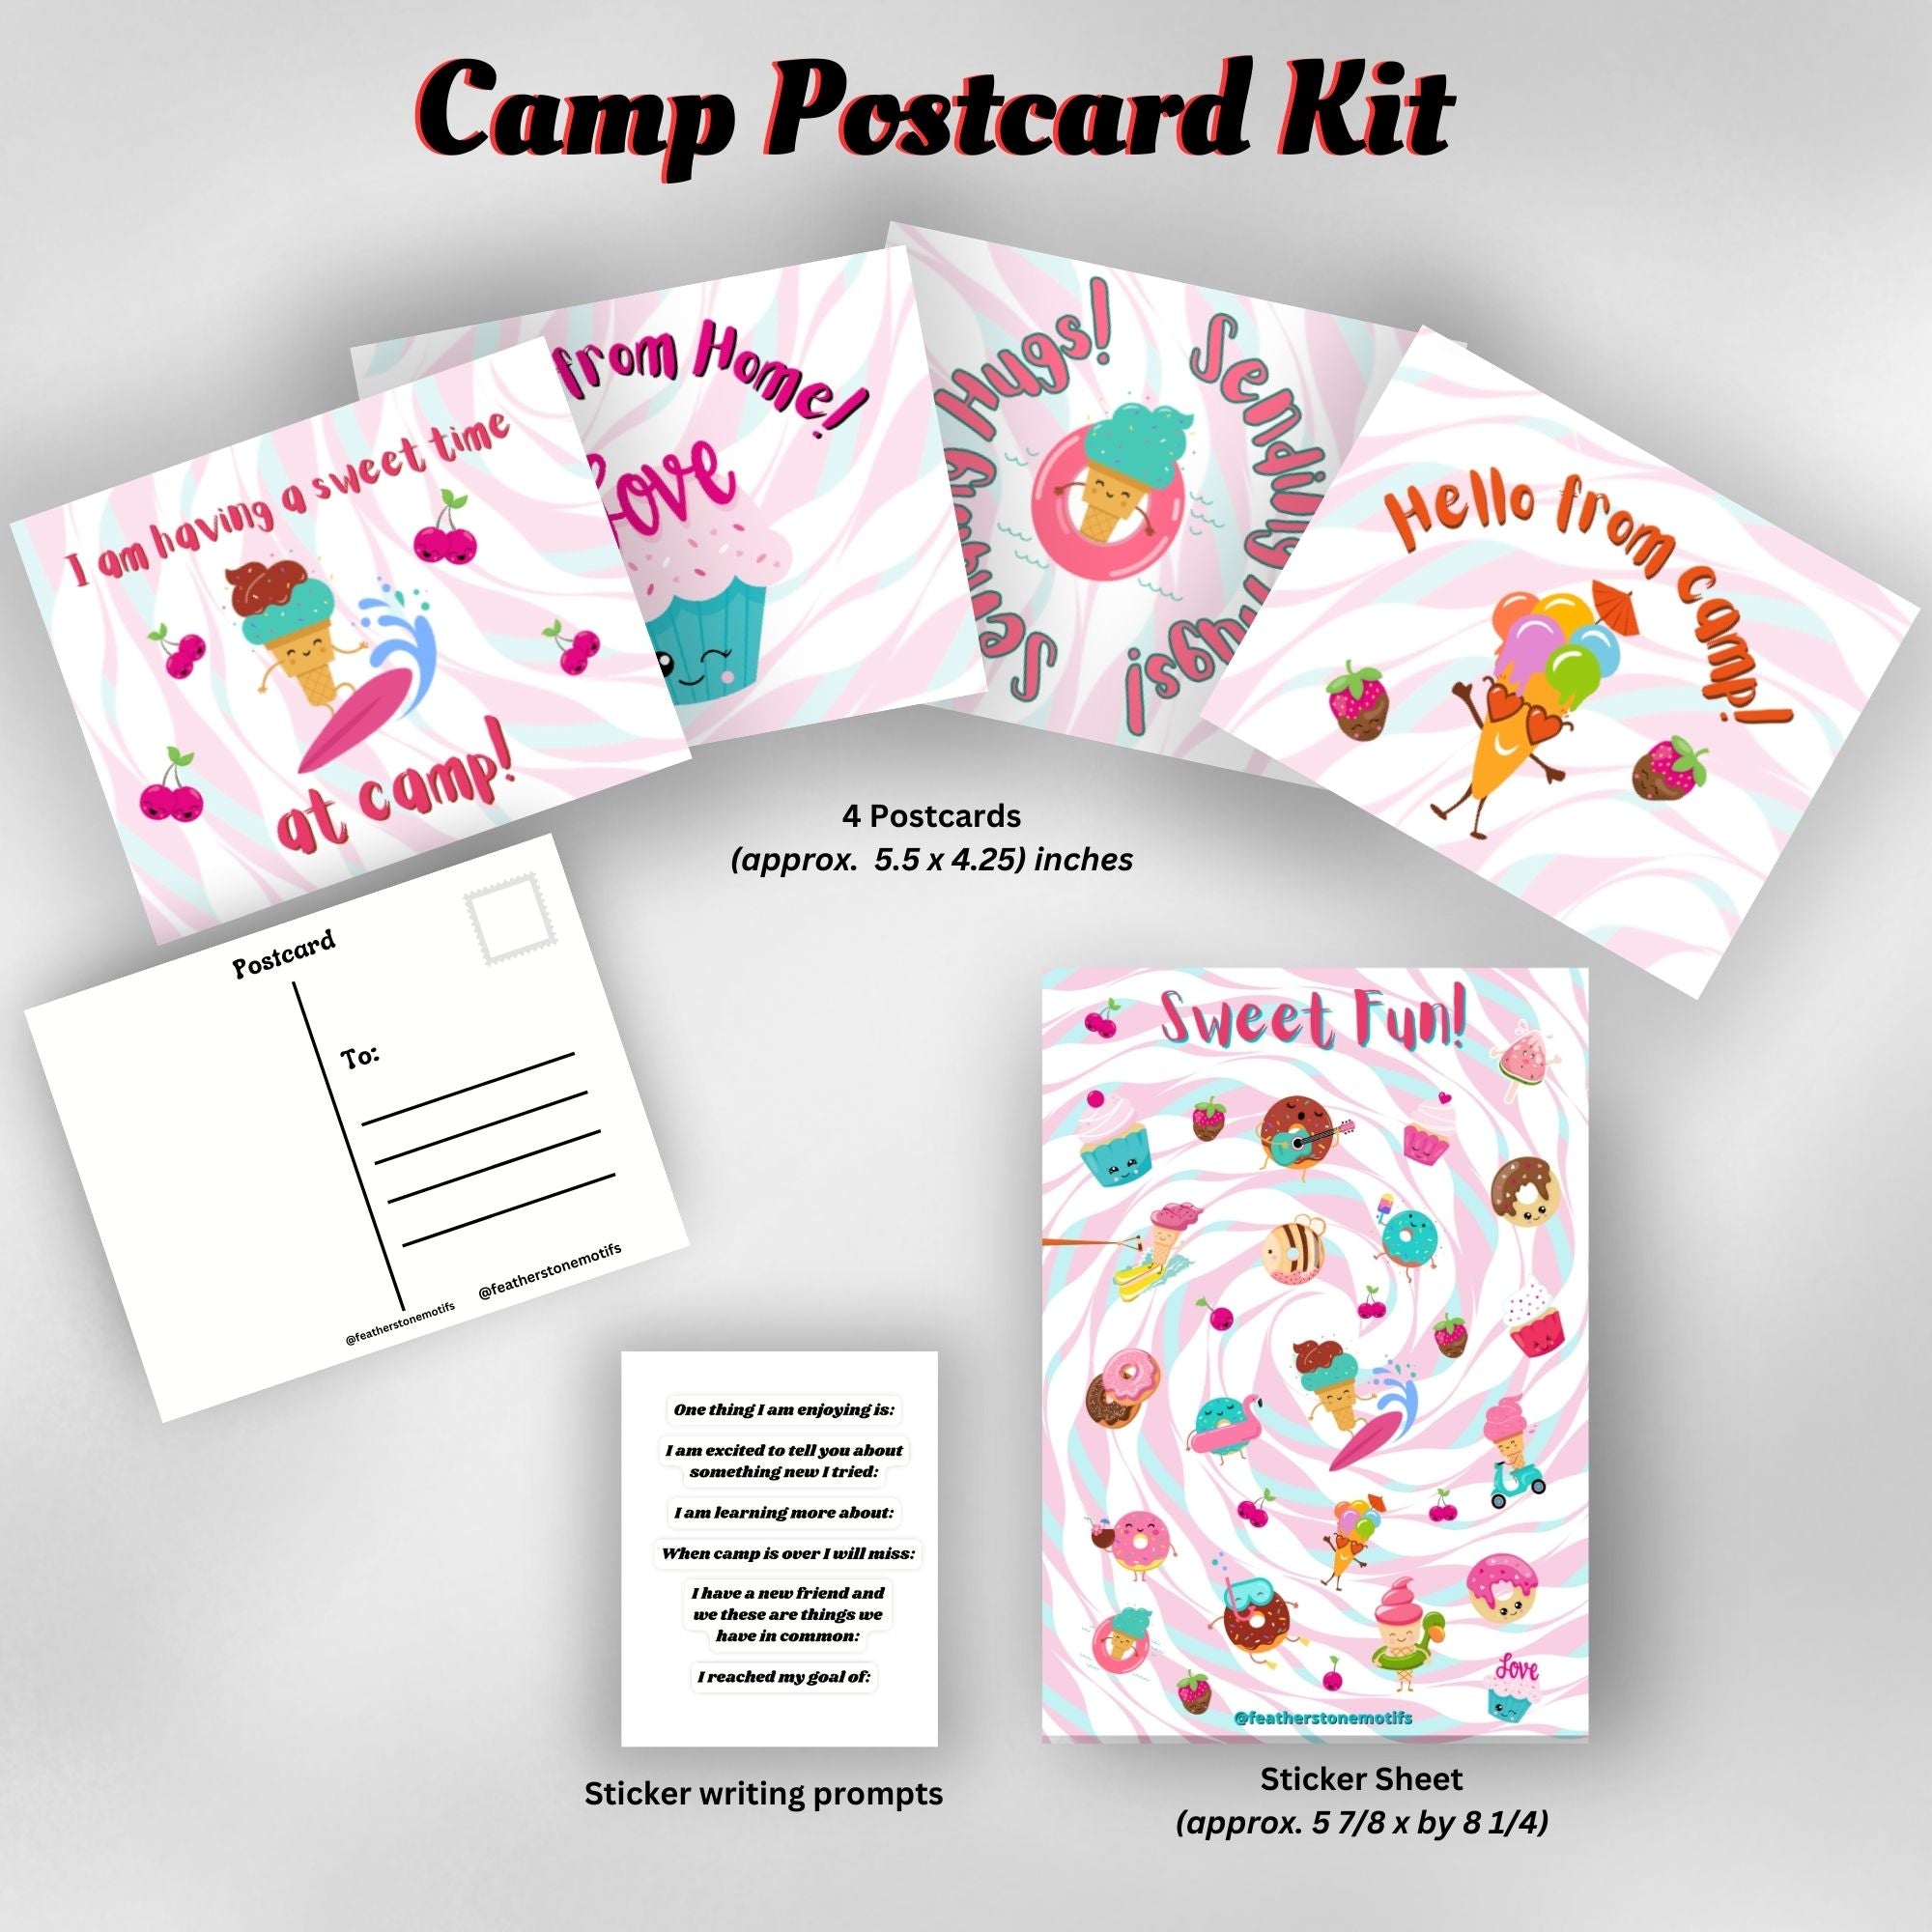 This image shows the Sweet Fun! themed Camp Postcard Kit with dimensions and descriptions for each item.